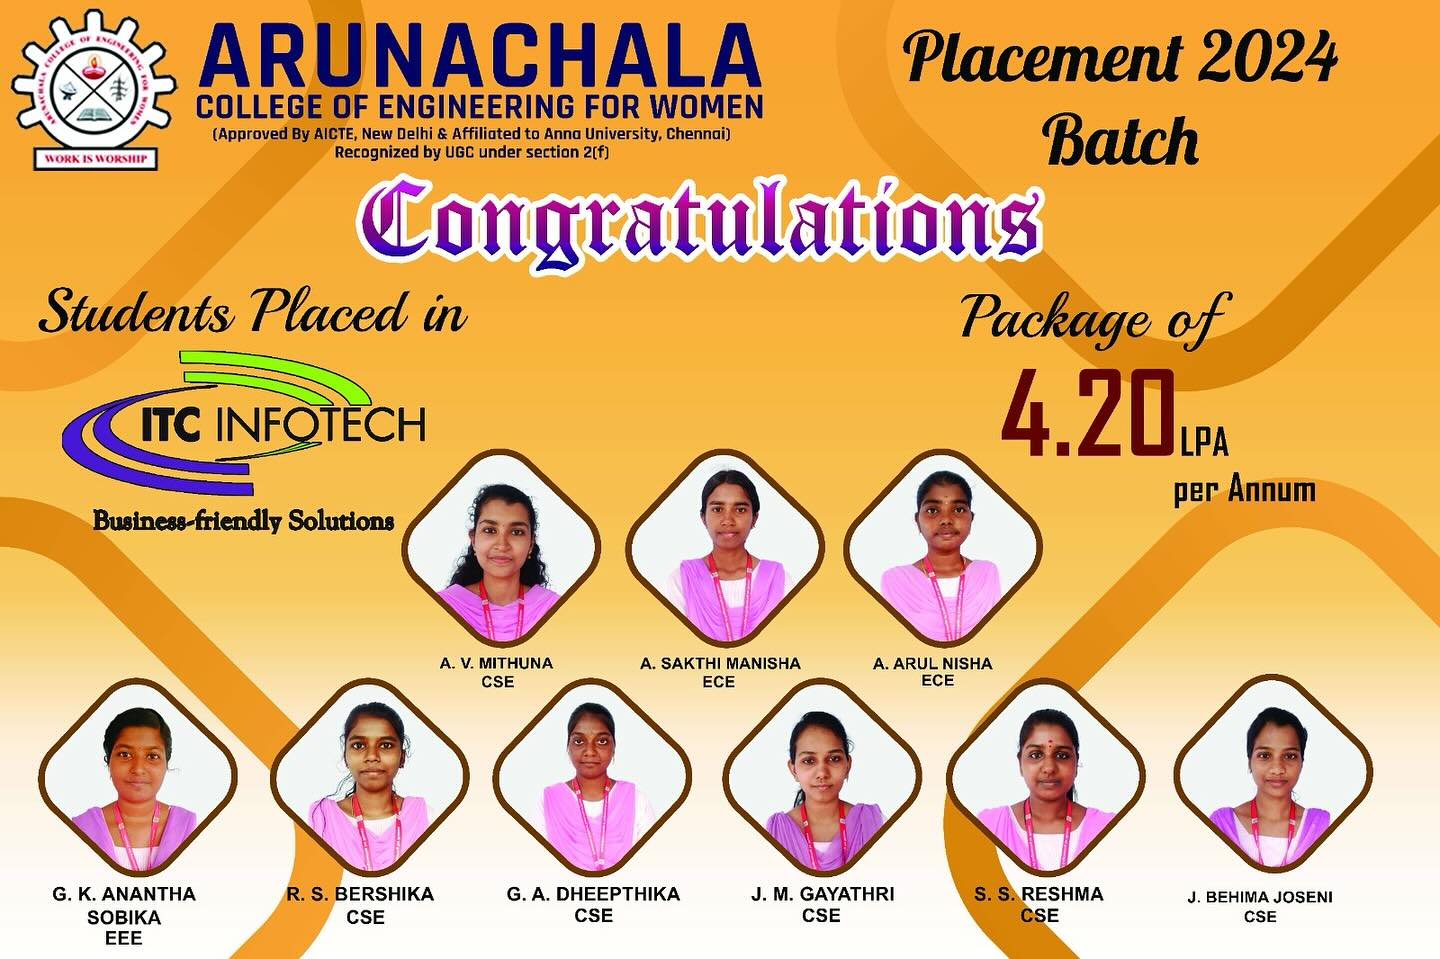 Students Placed in ITC Infotech